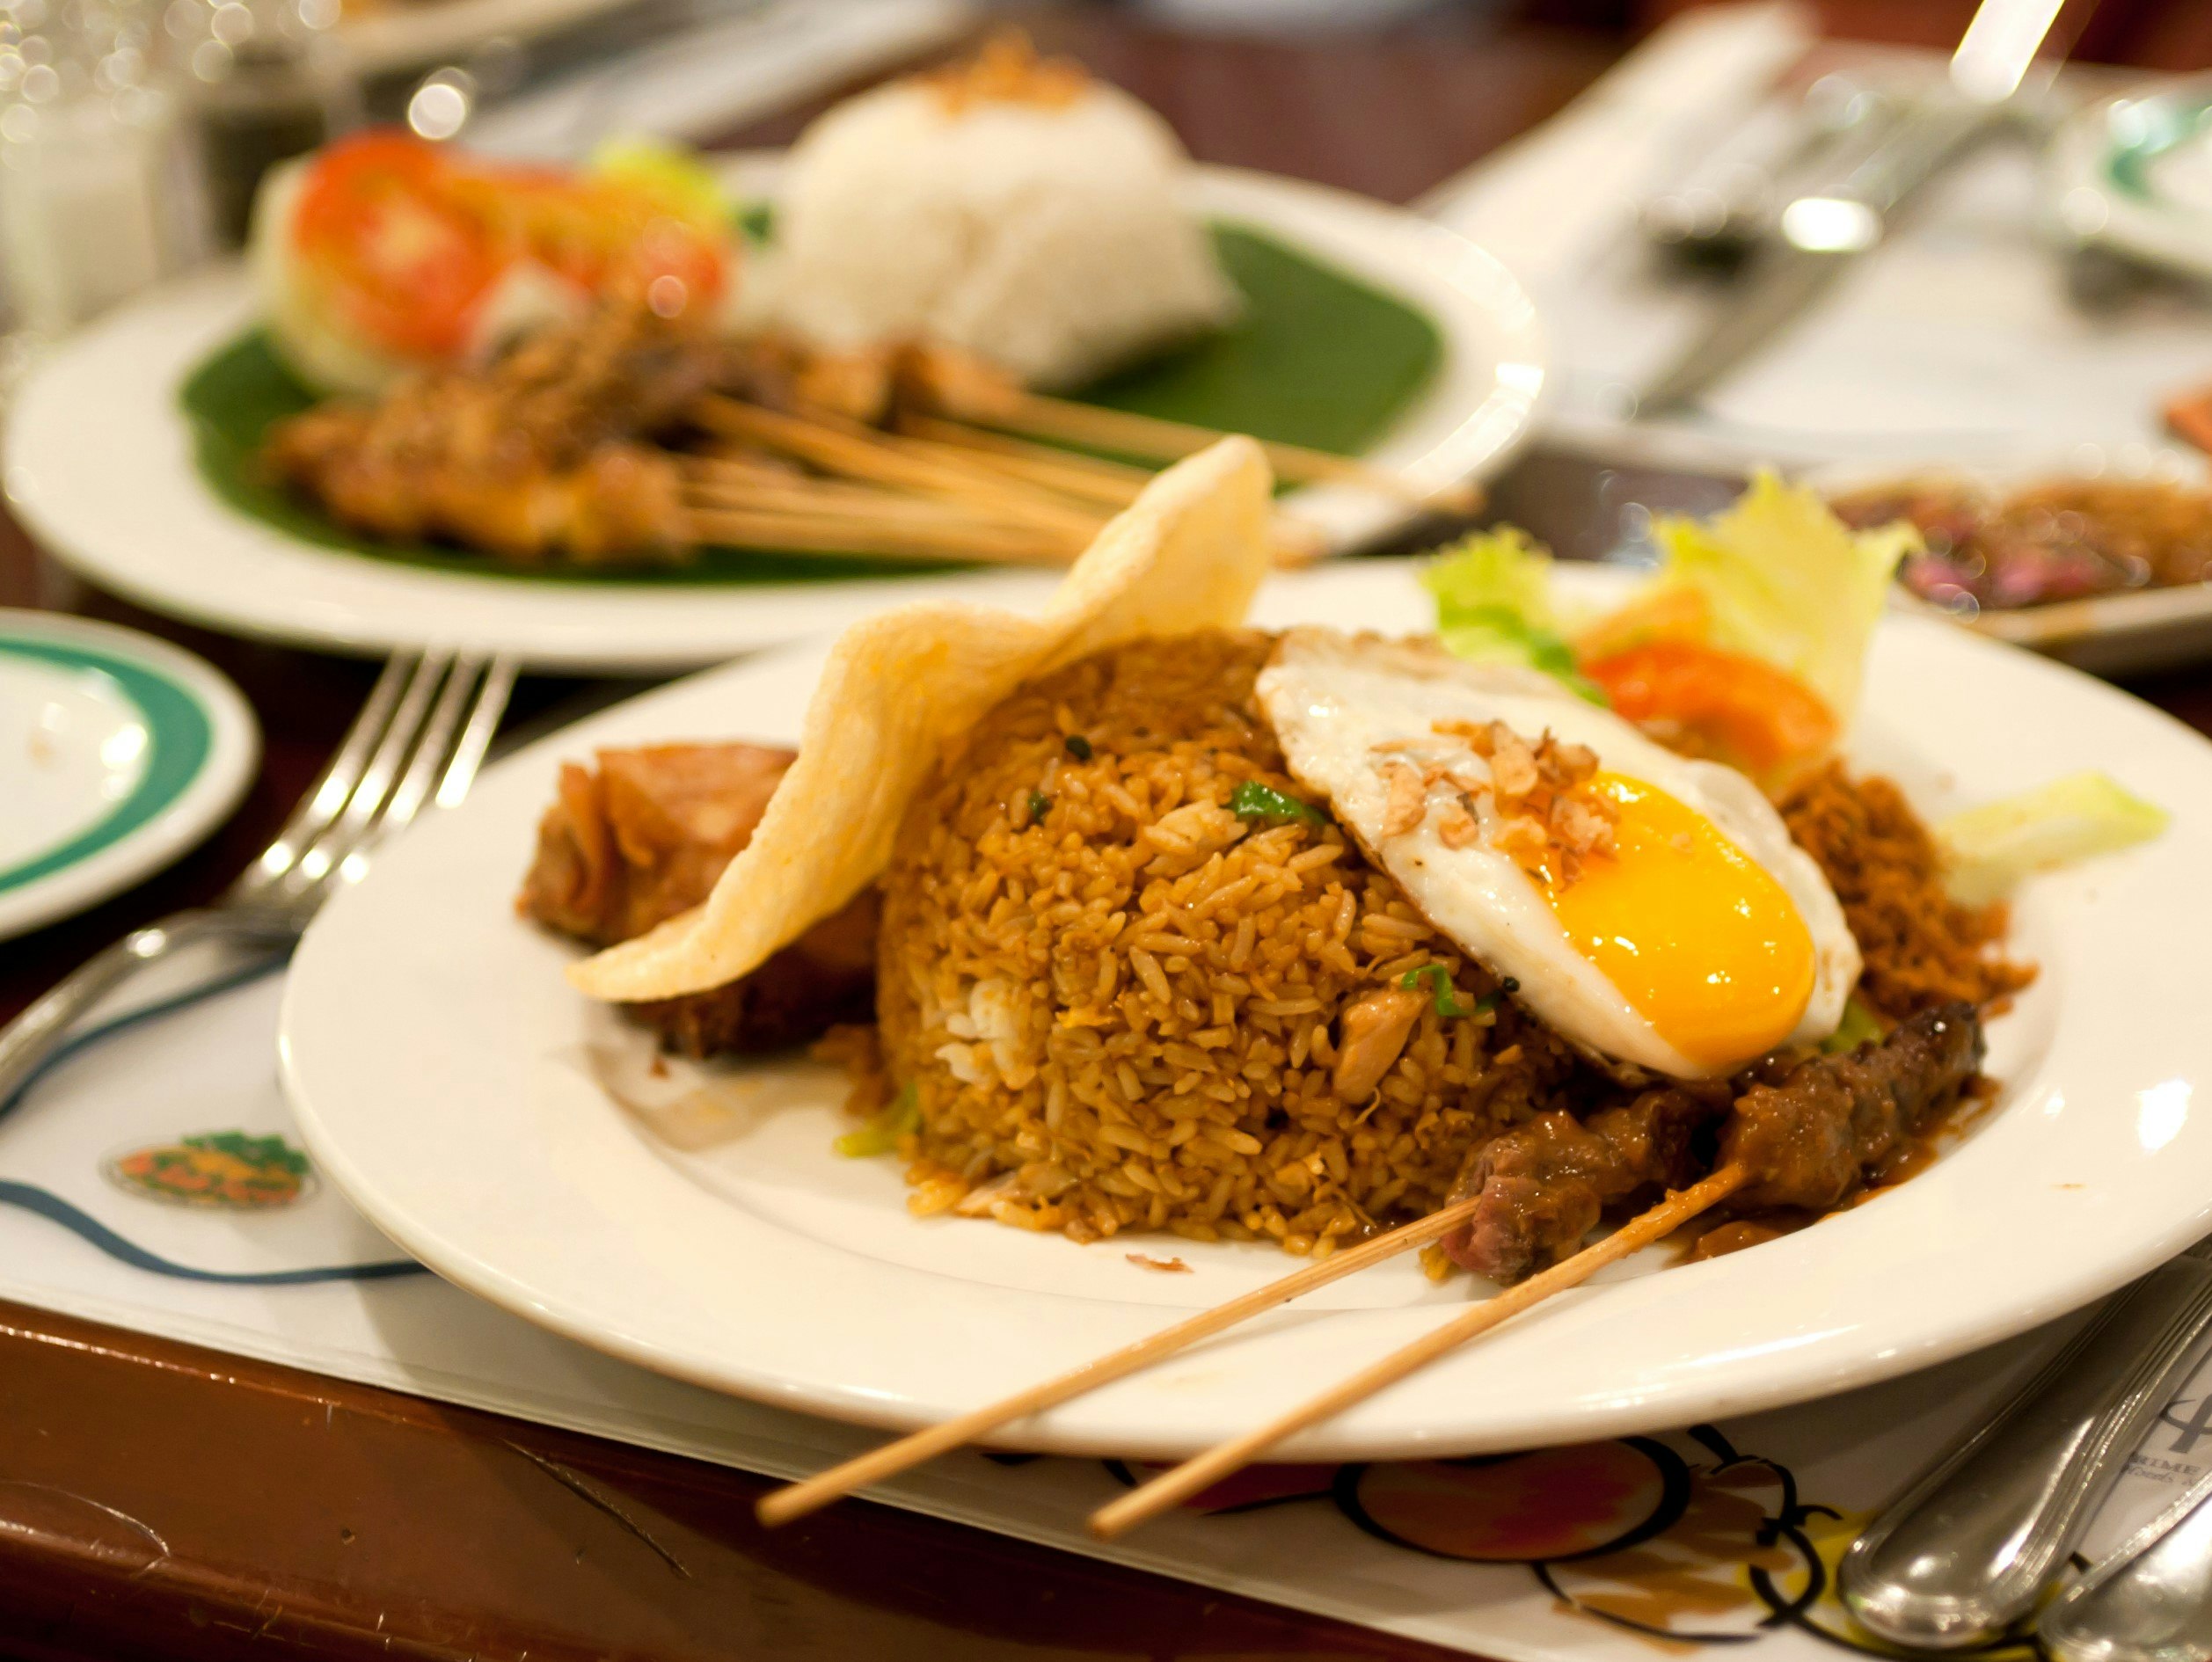 A plate of nasi goreng on a table. The dish consists primarily of rice and vegetables, topped with an egg. In this instance the dish is paired with chicken skewers.